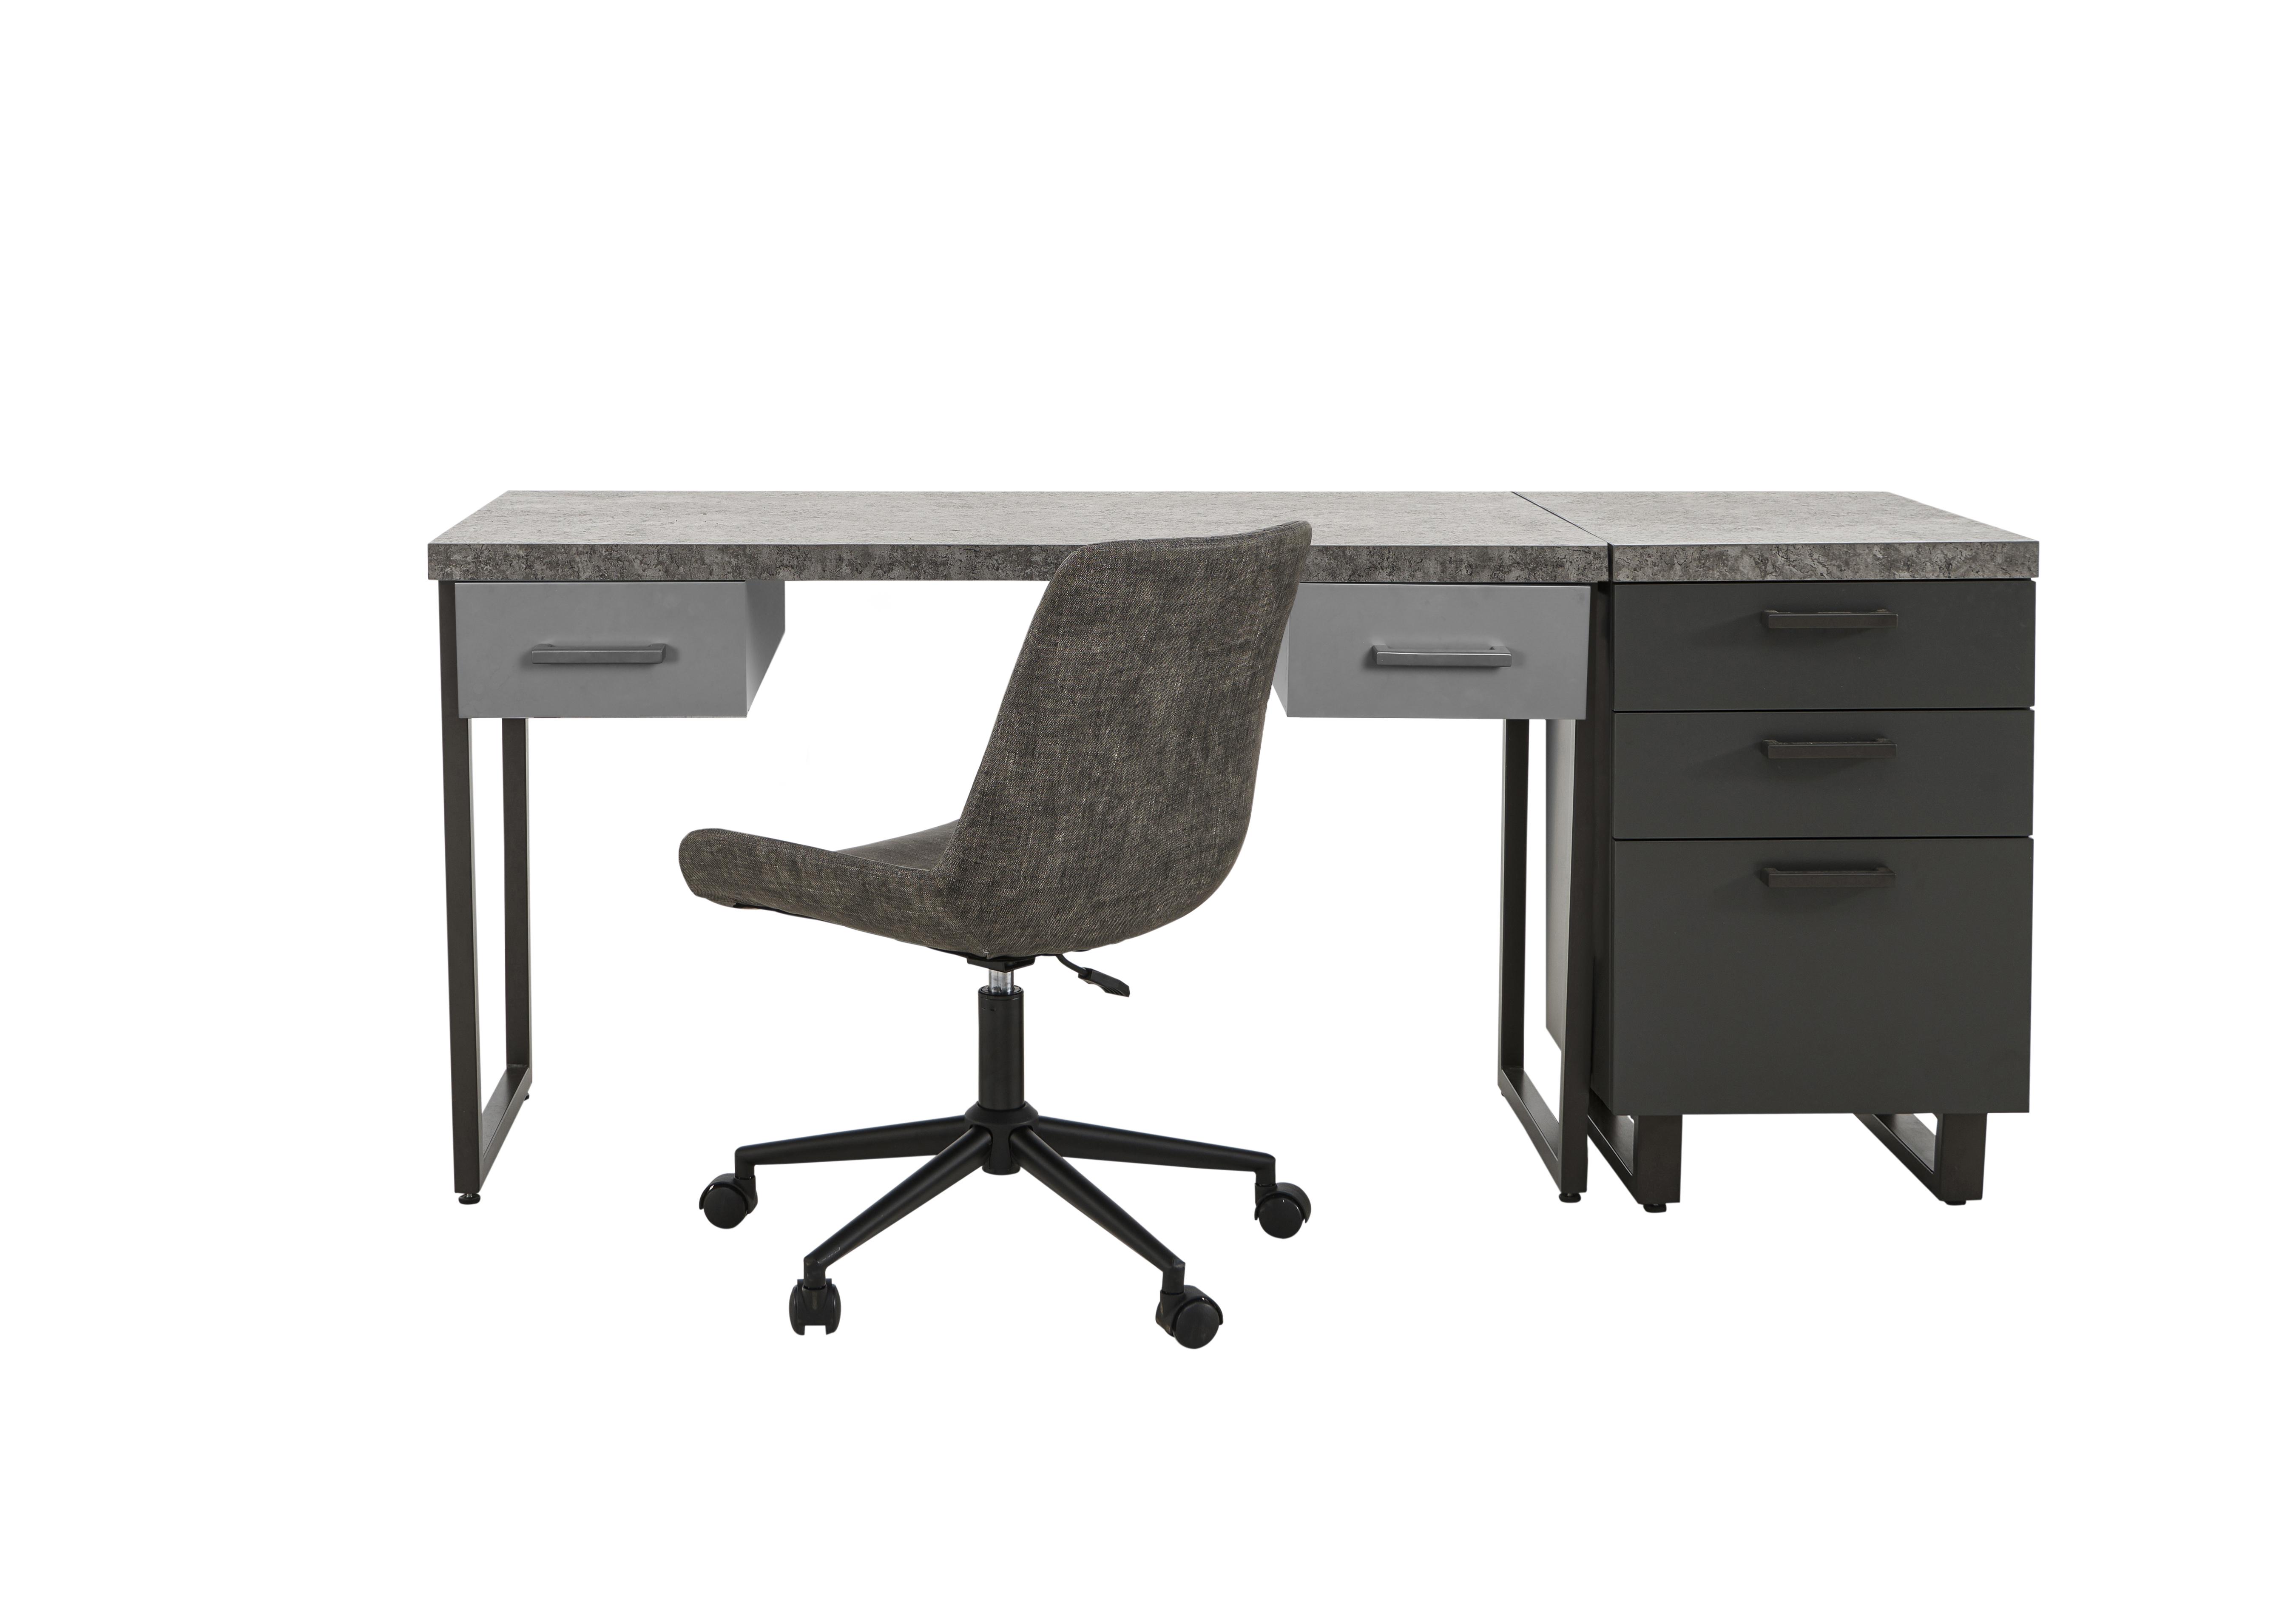 Moon Desk with Drawers, Filing Cabinet and Rocket Office Chair in  on Furniture Village